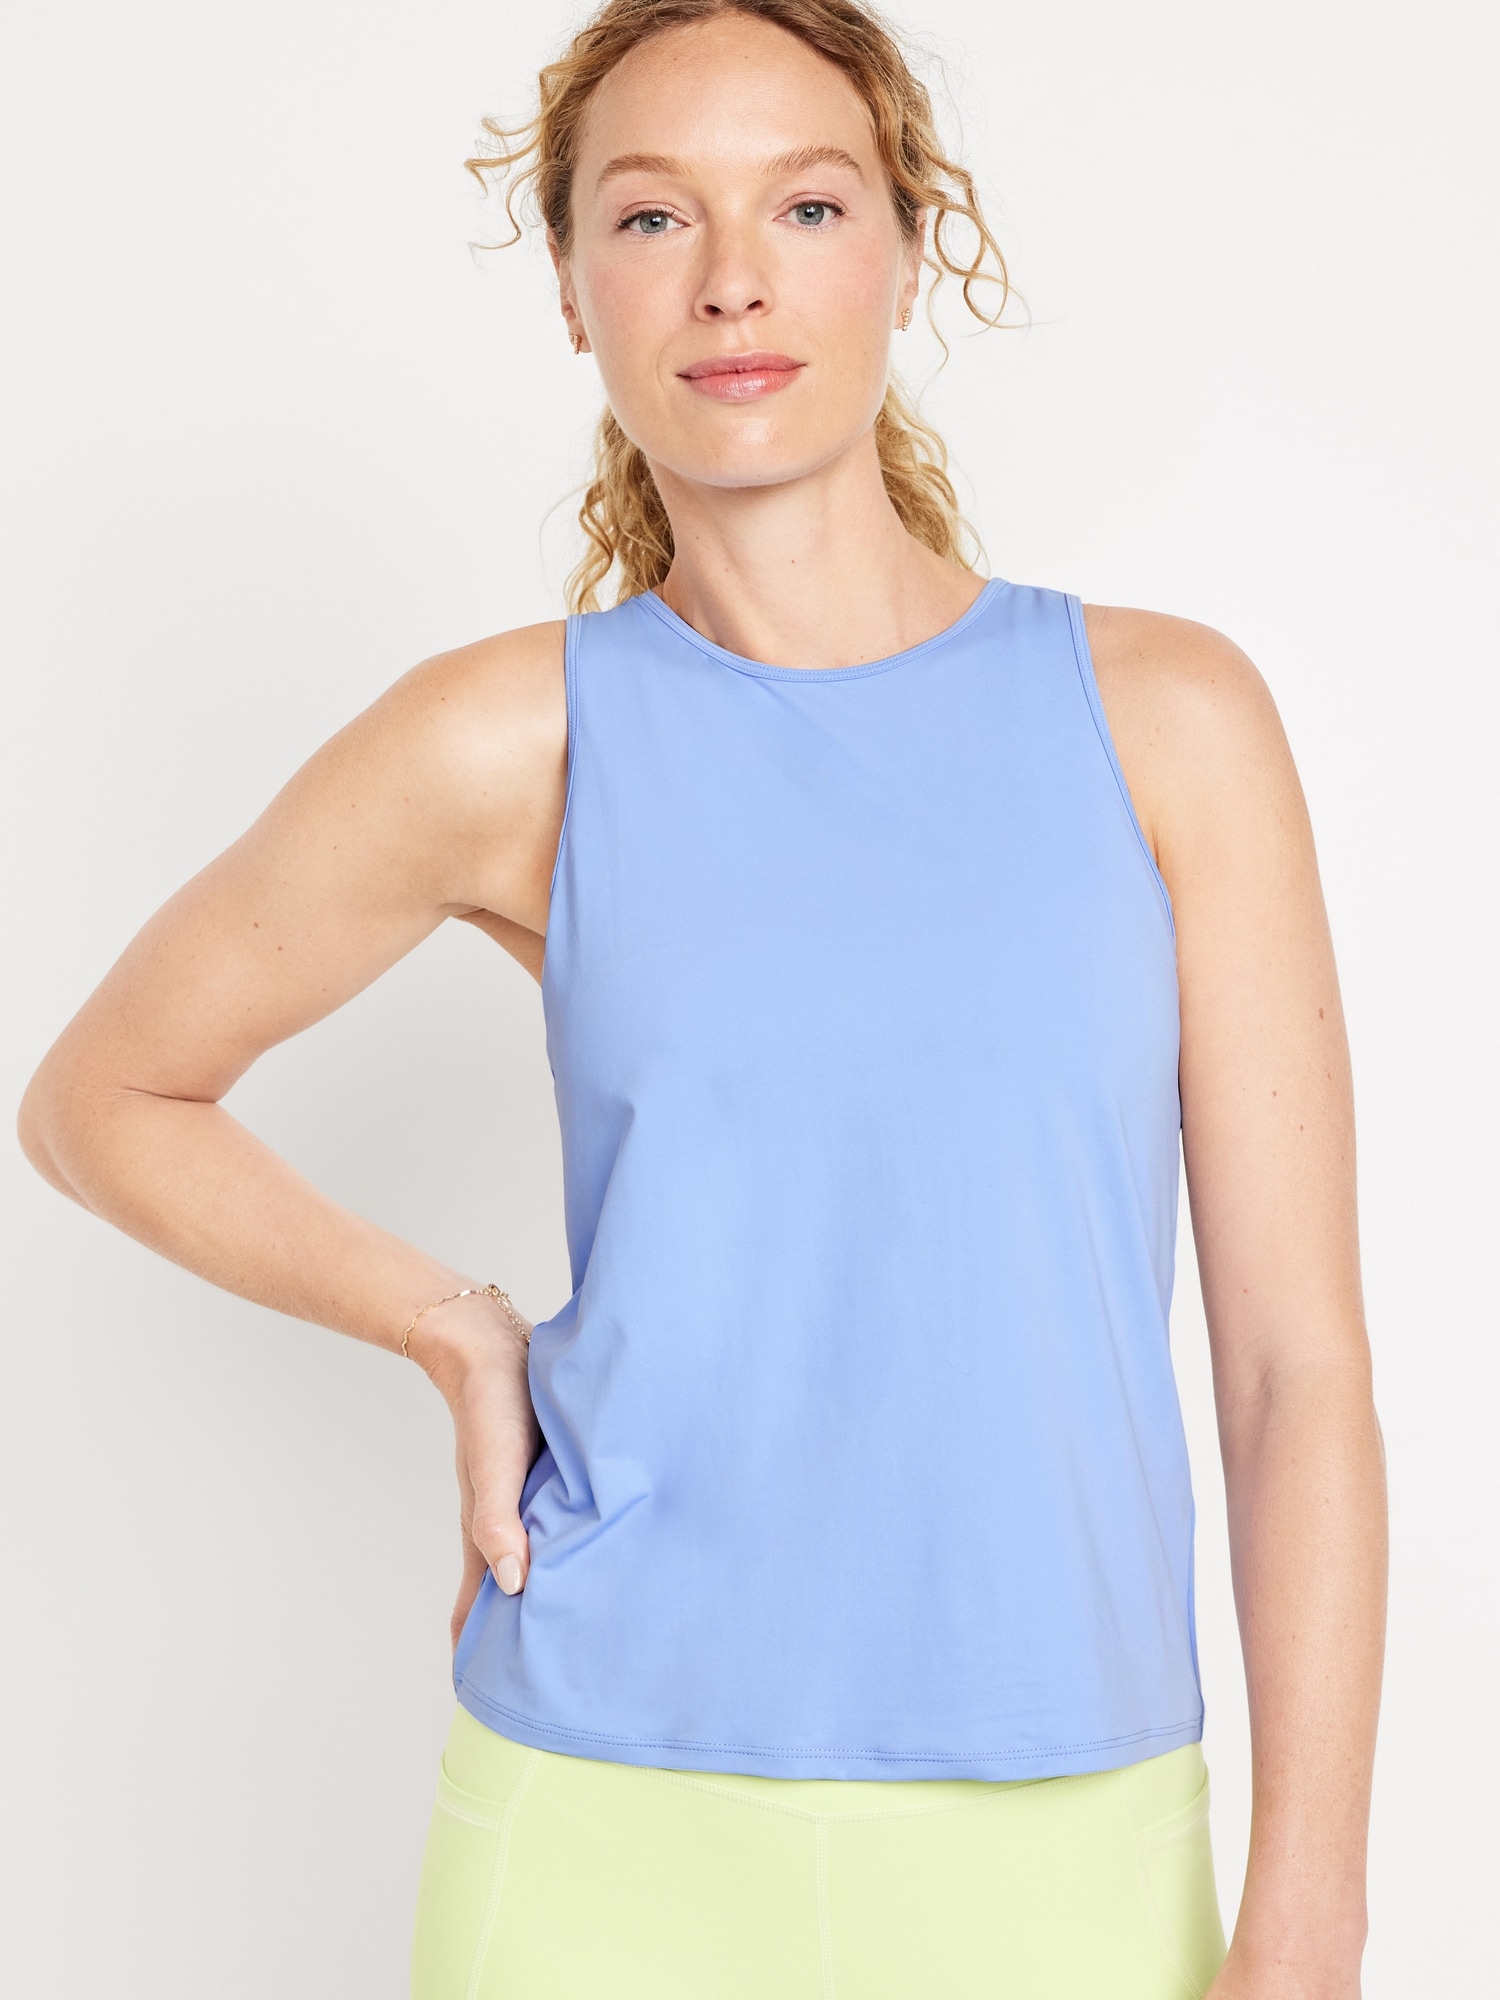 Latest SKIMS Tank Tops arrivals - Women - 1 products